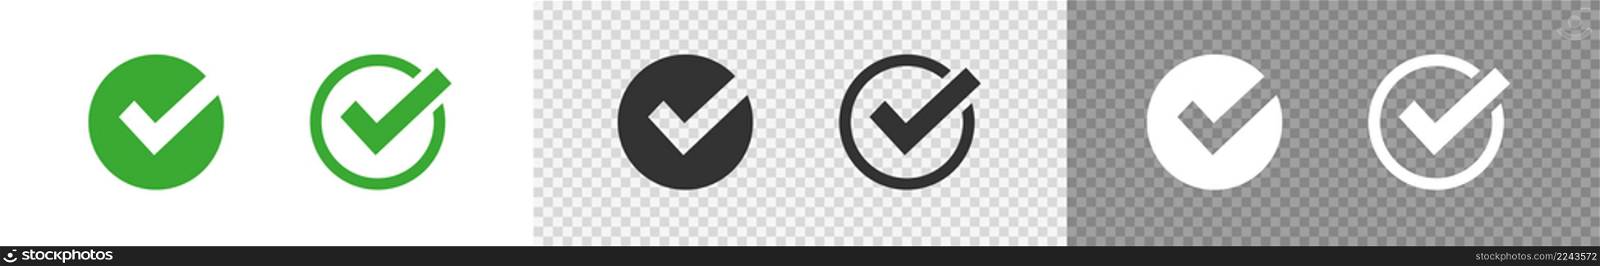 Check mark set icon. Green, black and white checkmark button in flat on transparent background. Vector tick yes sign symbol